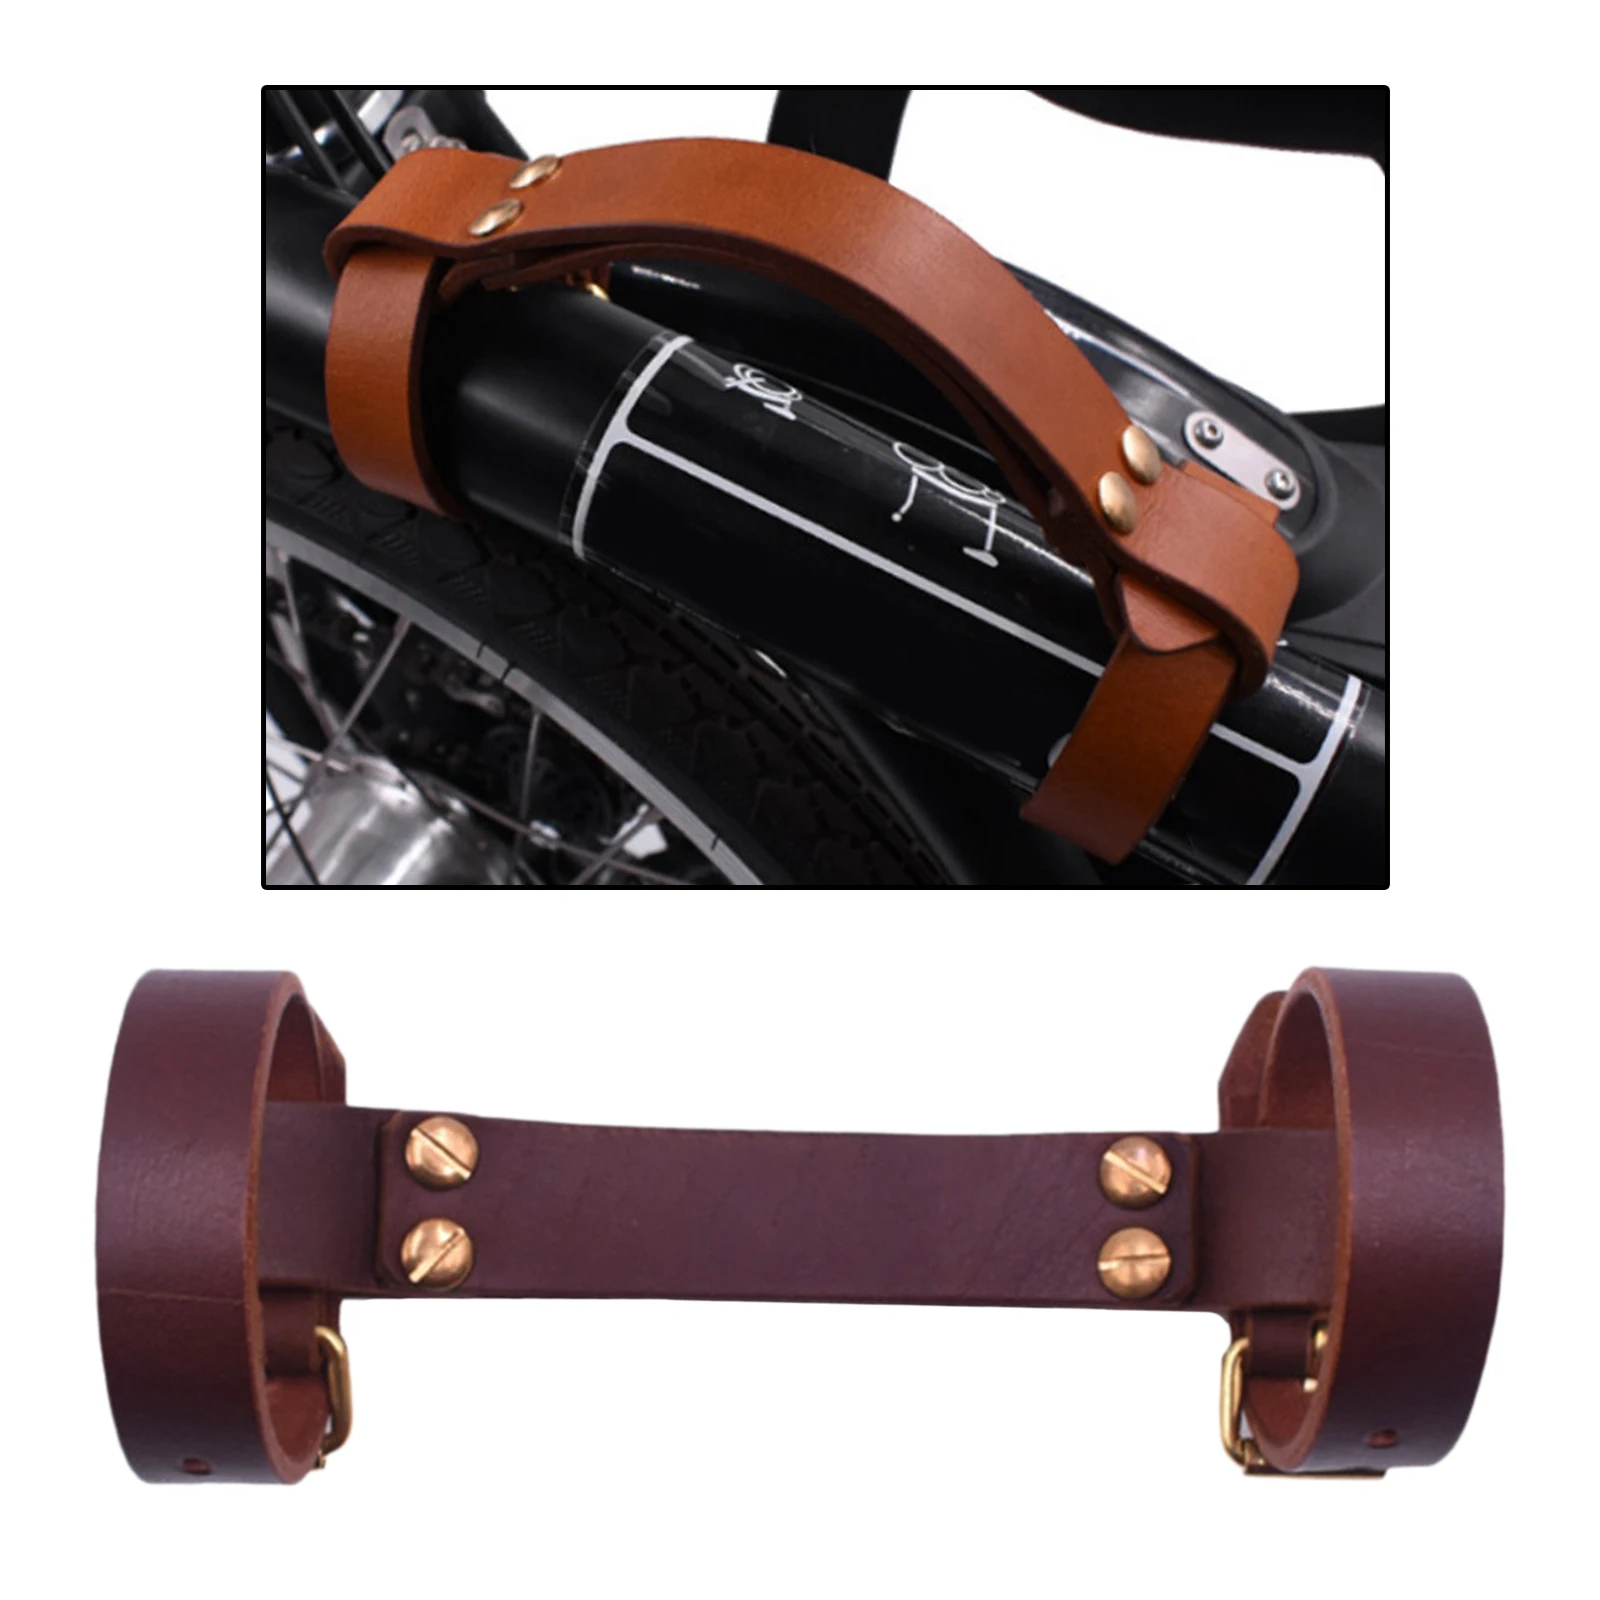 Foldable Bicycle Handgrip Bike Handlebar Handle Straps Accessories Exquisite for Travel